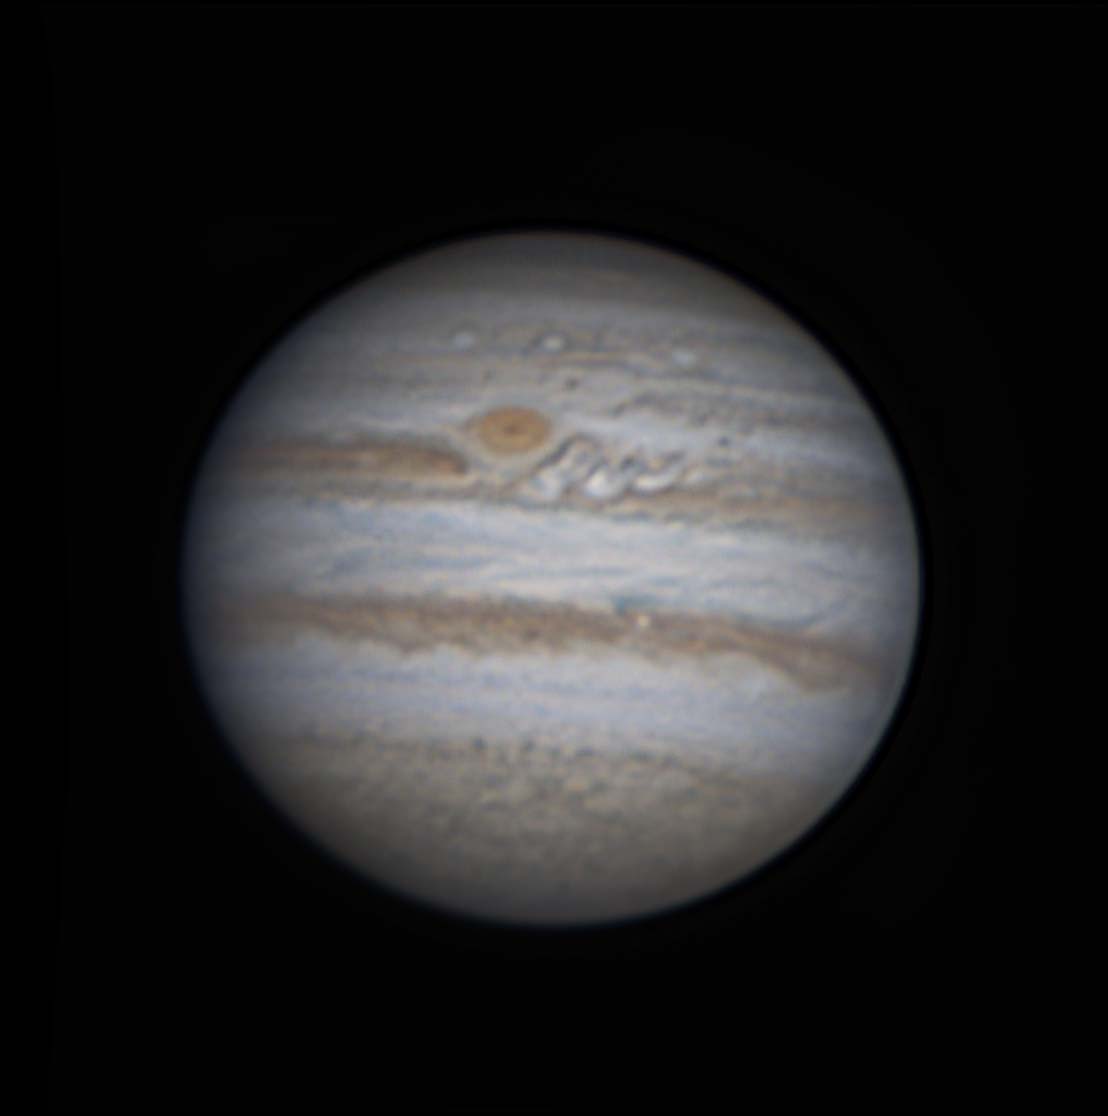 Turns out putting south on top makes it look nicer (in my opinion) Jupiter from 2am today